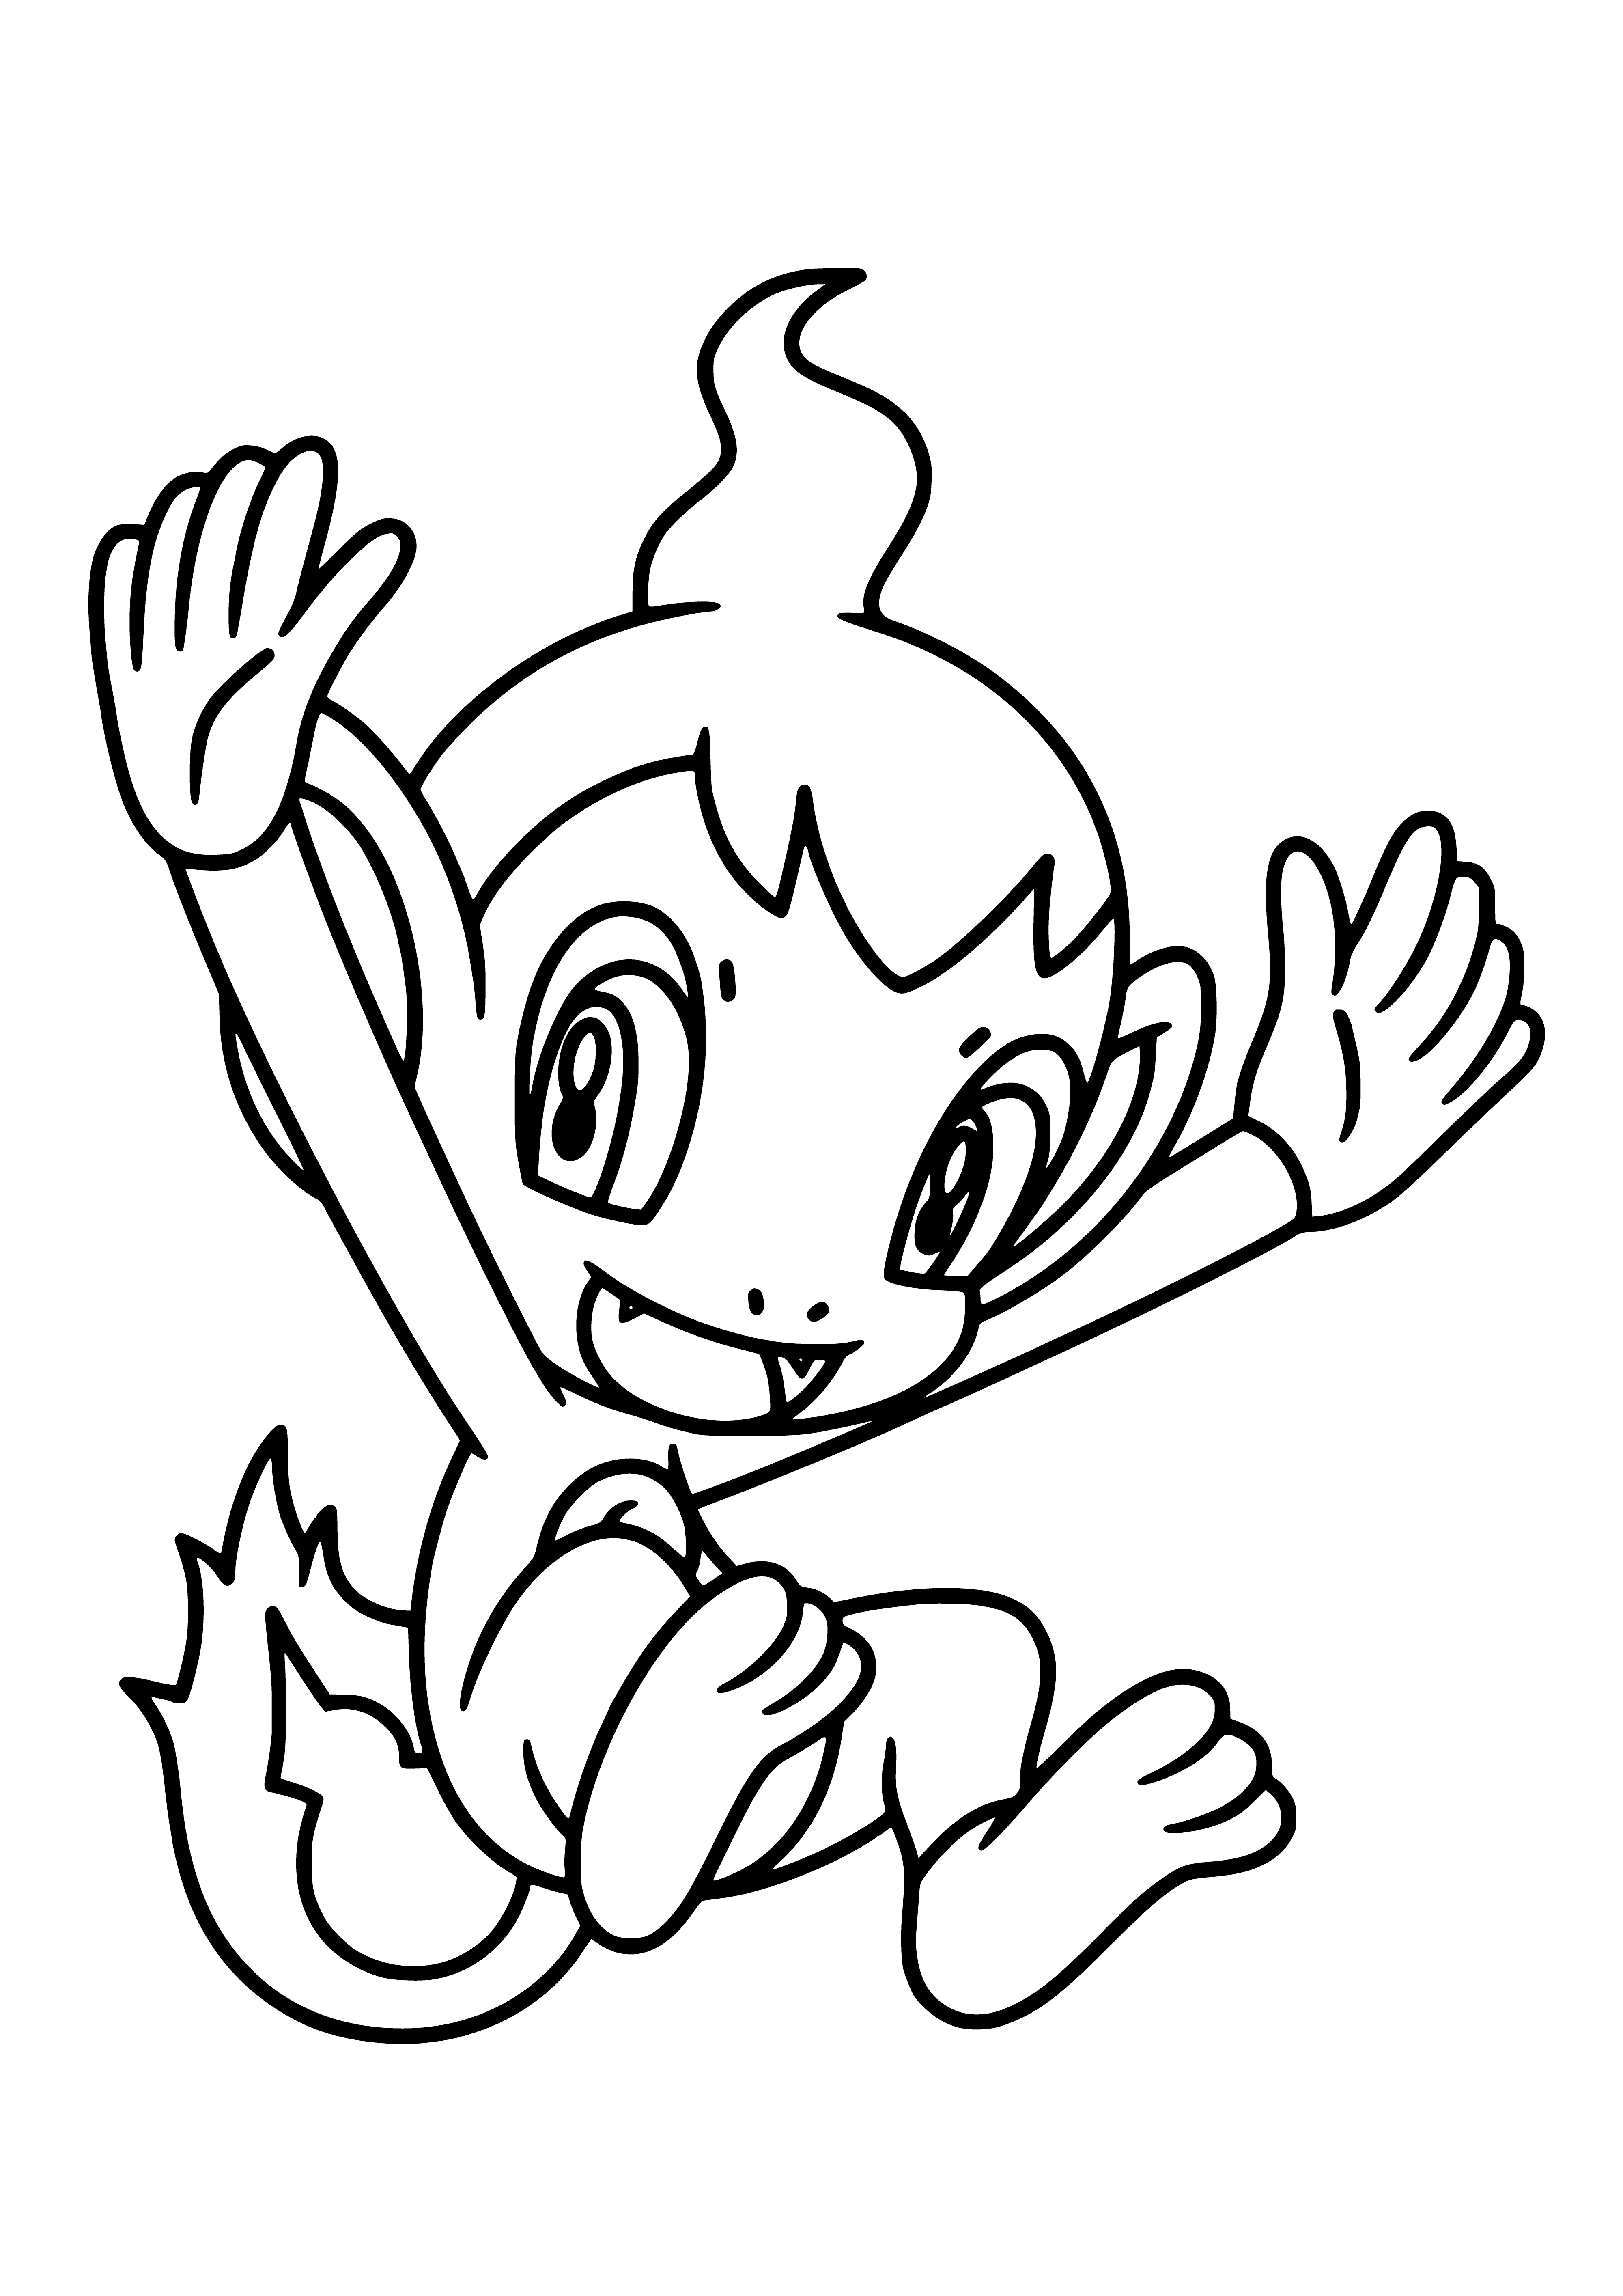 Pokemon Chimchar coloring page